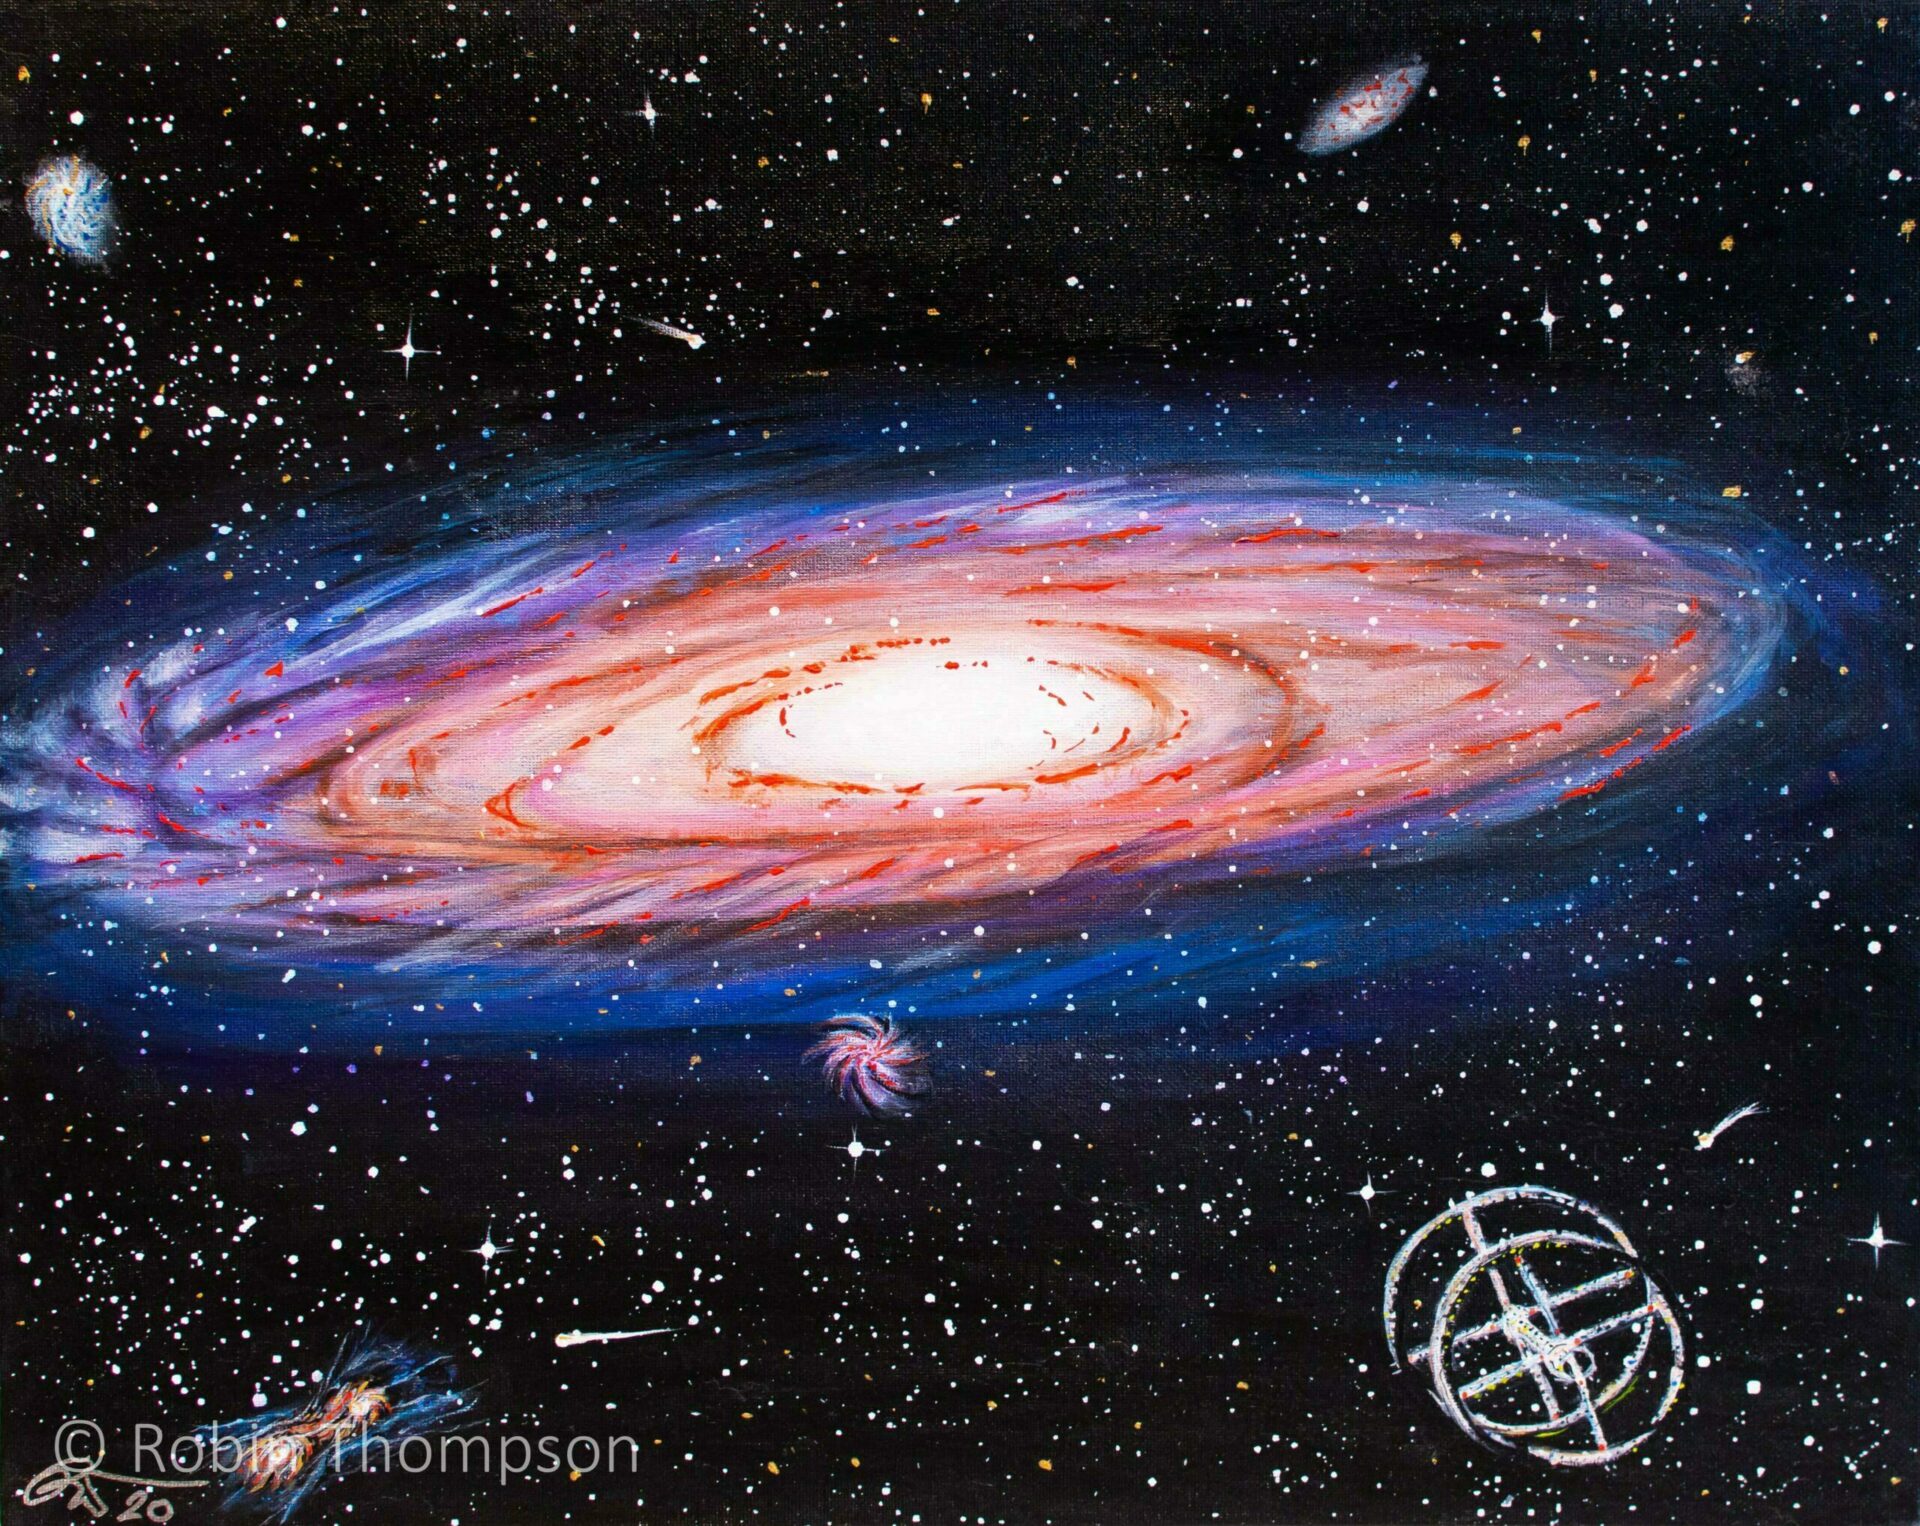 An acrylic painting of the Andromeda galaxy. A deep black space background is seen, along with many smaller galaxies and stars. A Kubrick-like spaceship is seen in the lower right. The centre galaxy has blues, purples, whites and reds dominating.